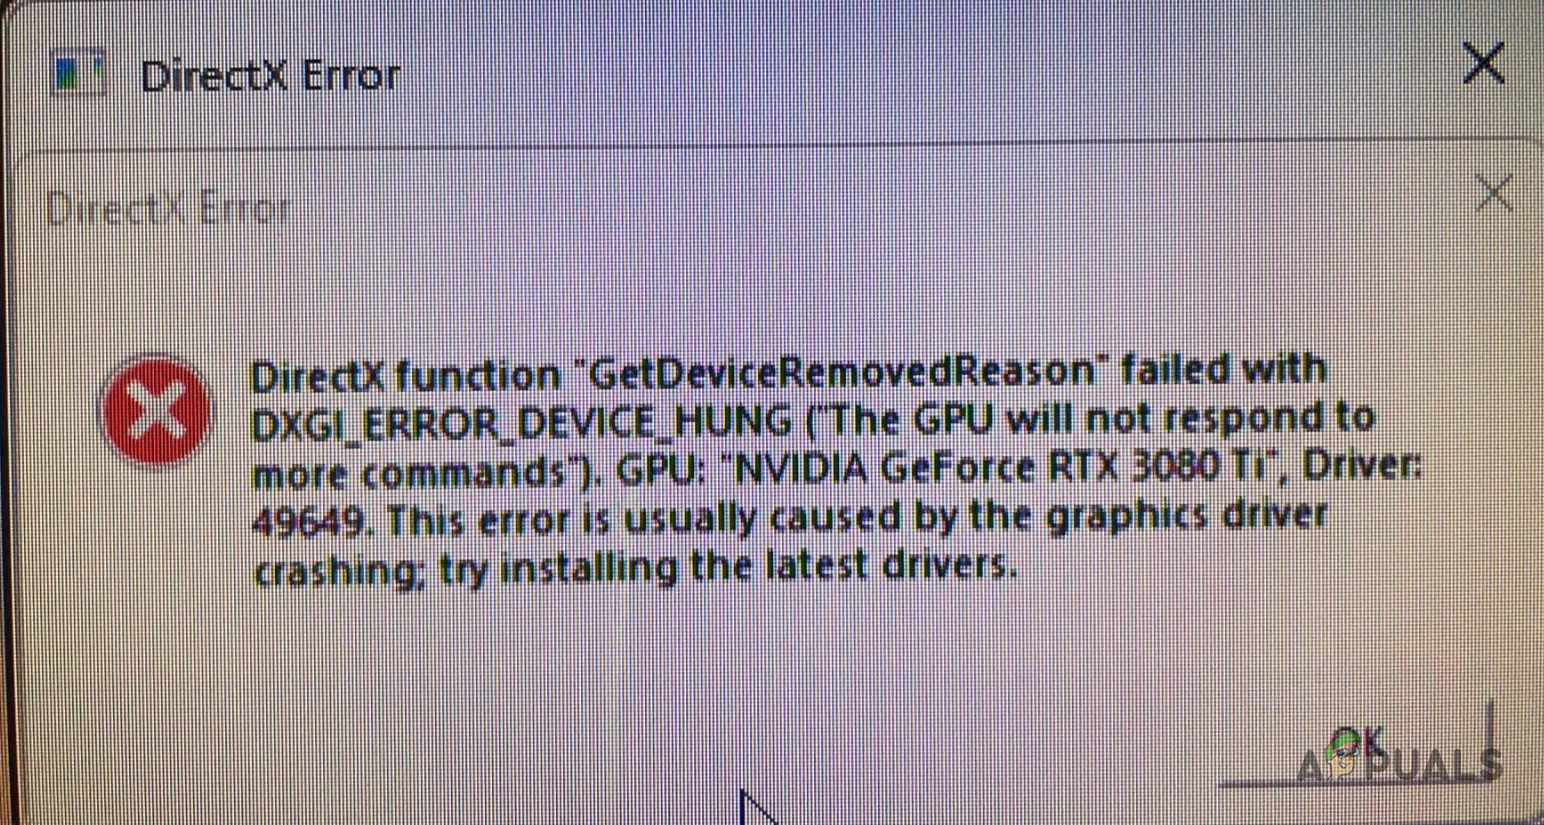 Directx function failed. Ошибка DIRECTX function GETDEVICEREMOVEDREASON failed with dxgi_Error_device_hung. Ошибка GPU. Dxgi_Error_device_hung. Критическая ошибка the GPU is not responding.